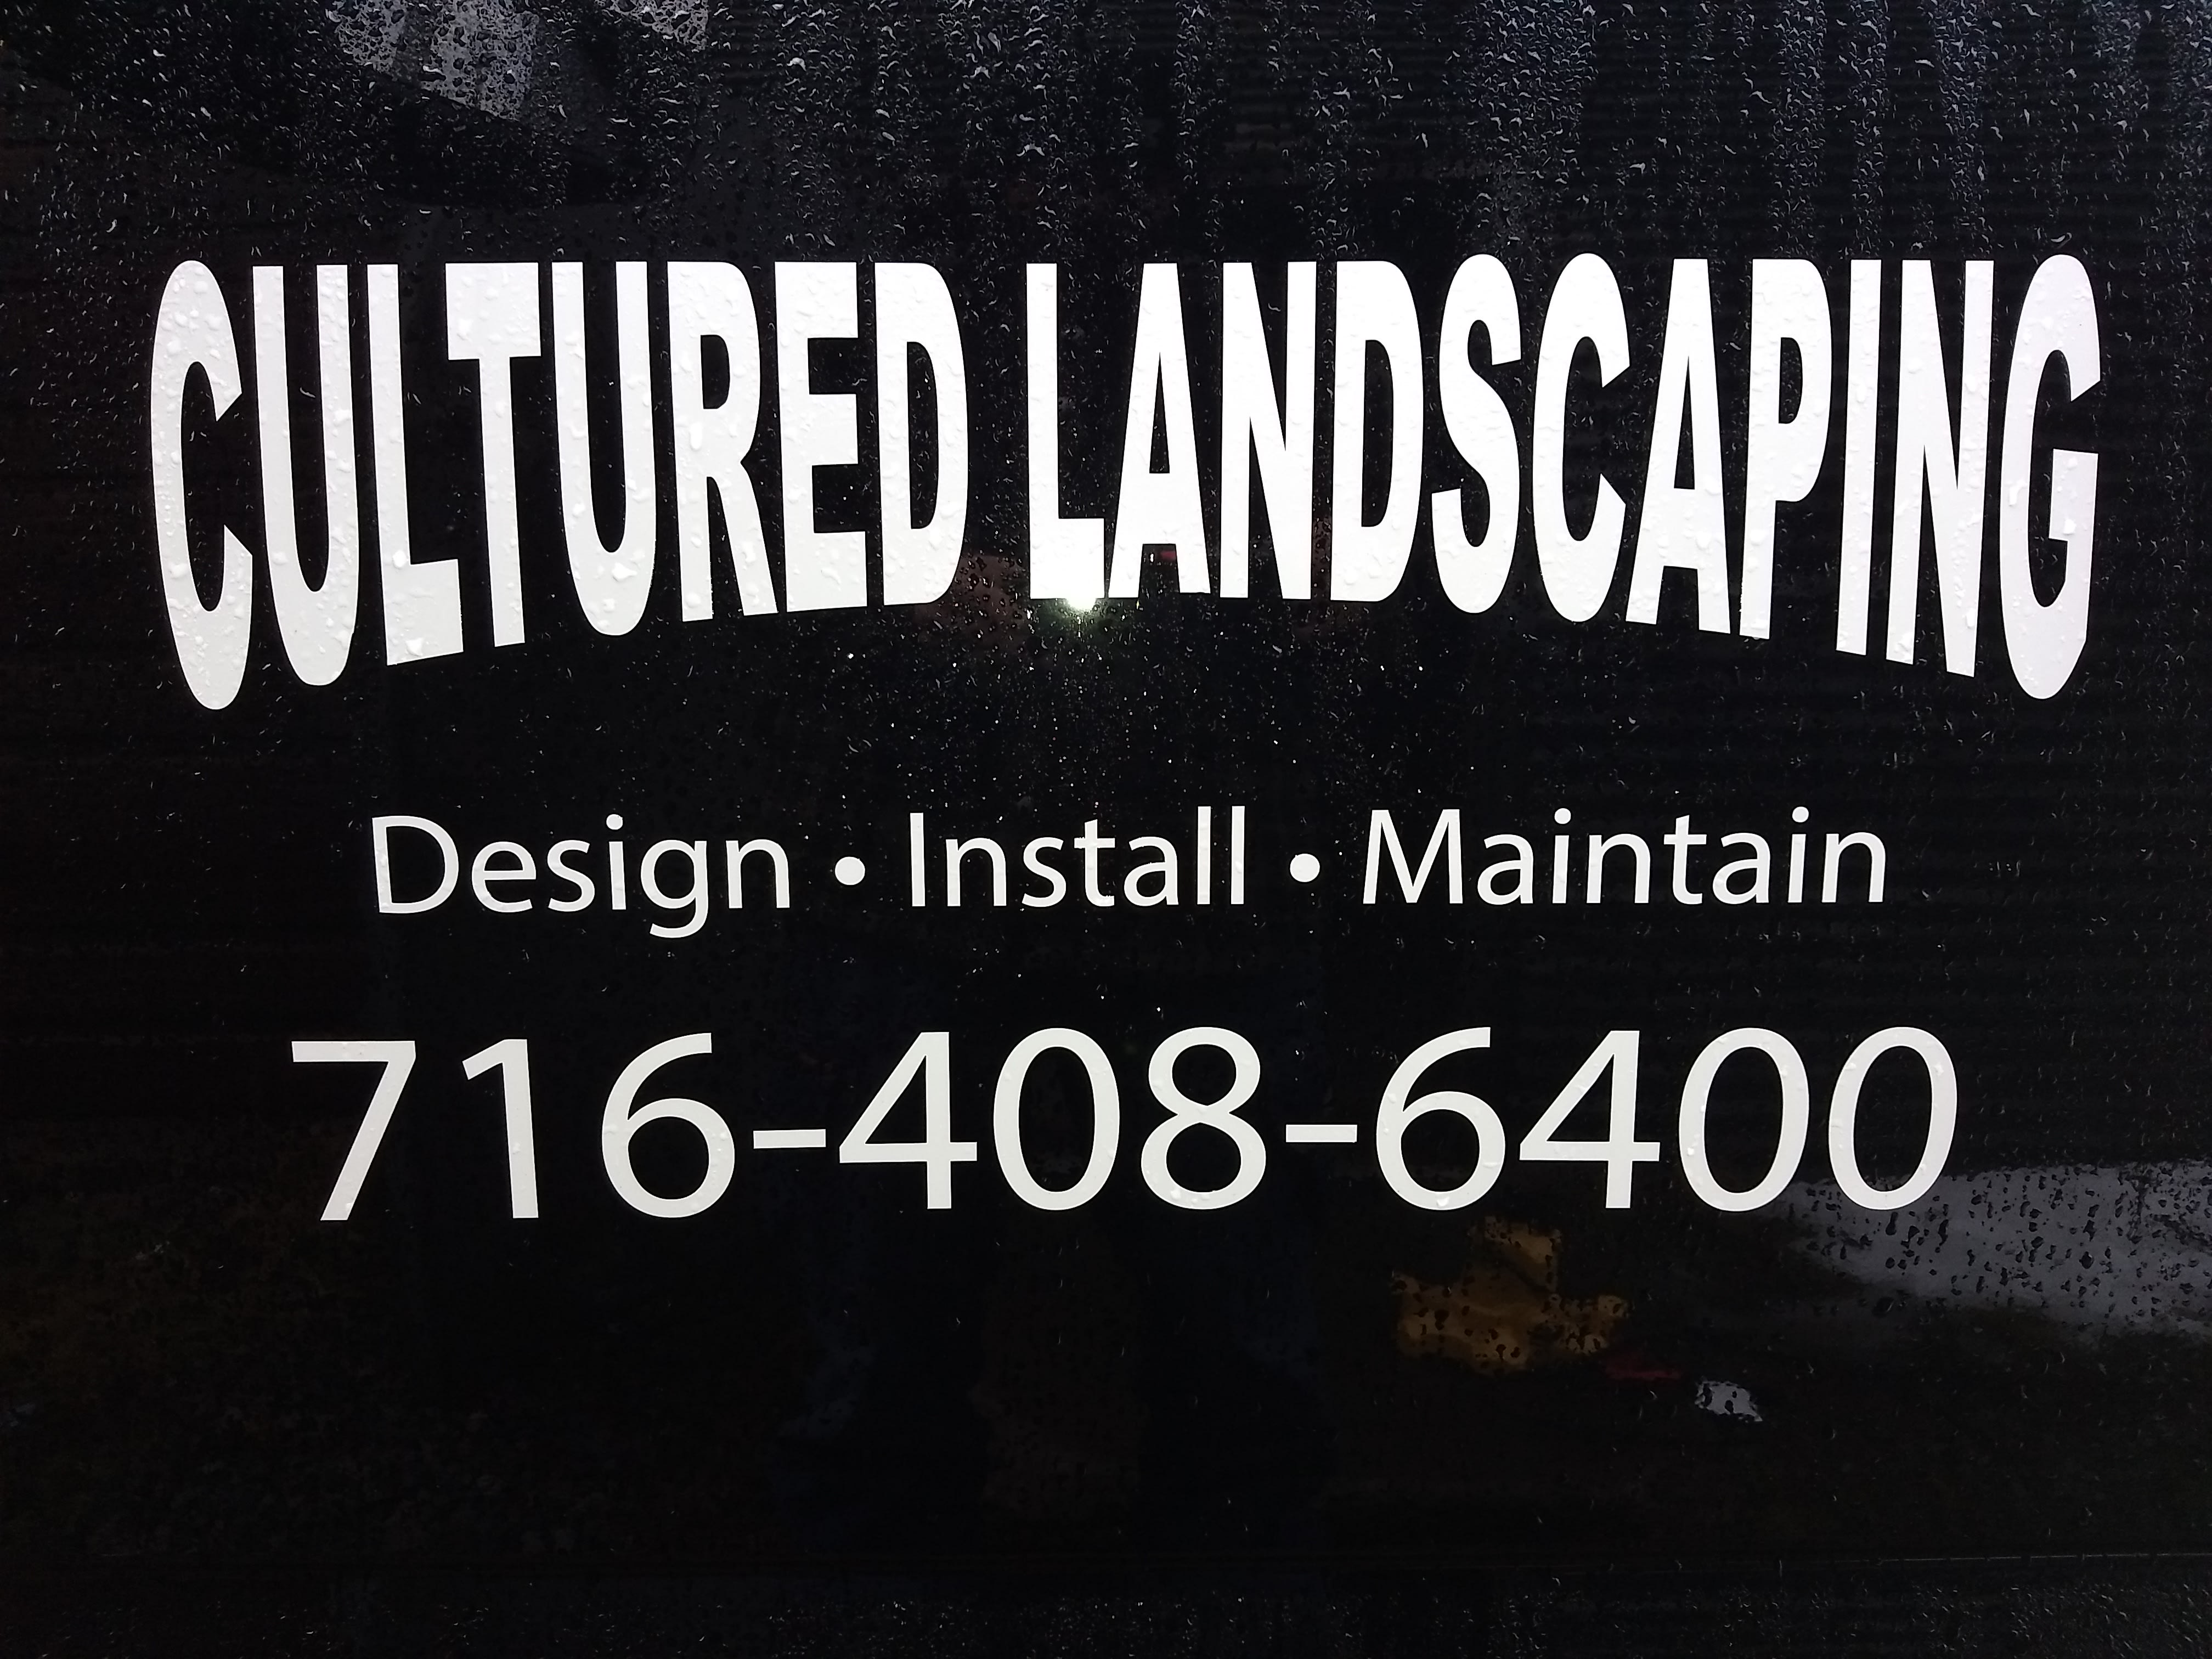 Cultured Landscaping